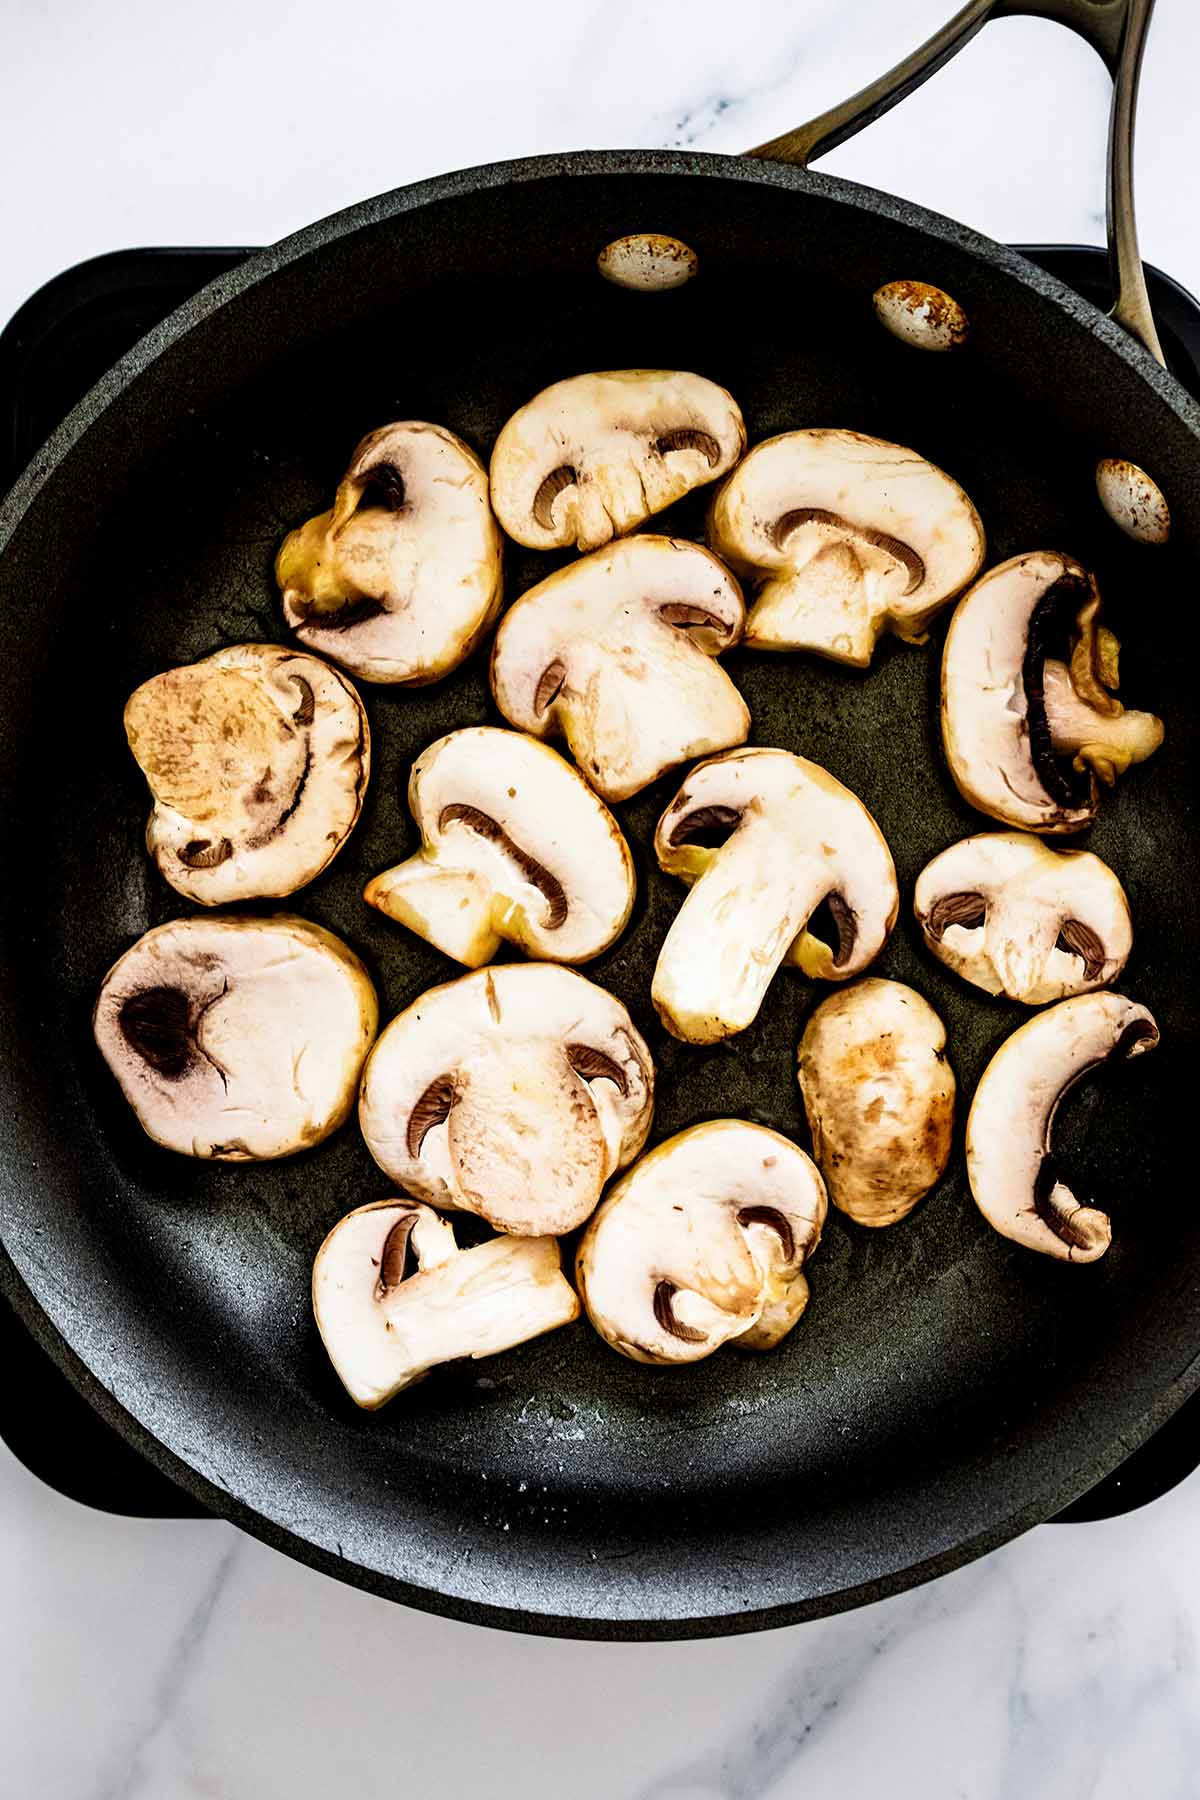 Overhead view of sliced mushrooms cooking in a skillet